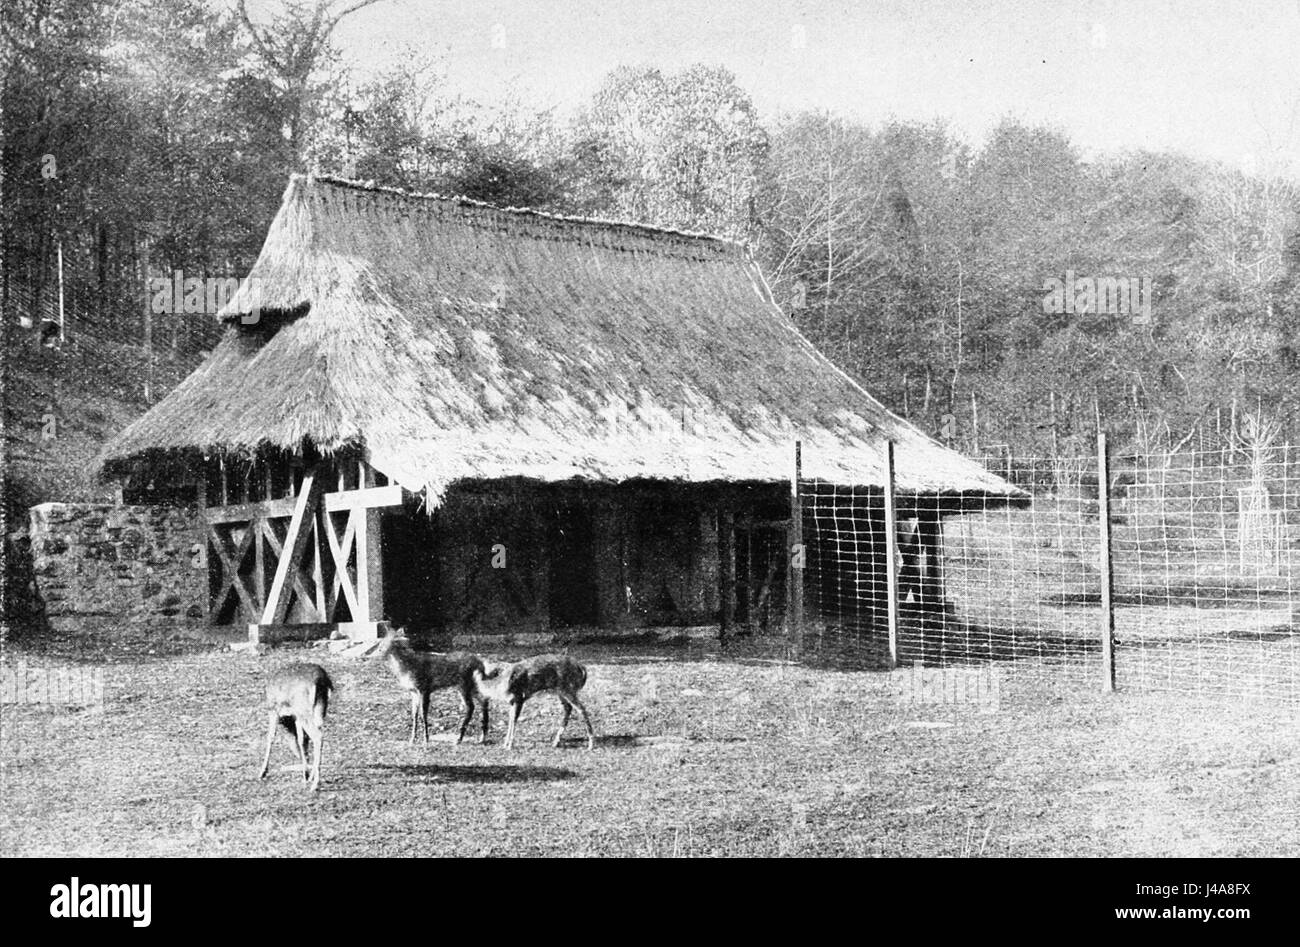 PSM V48 D503 Deer house in the national zoological park Stock Photo